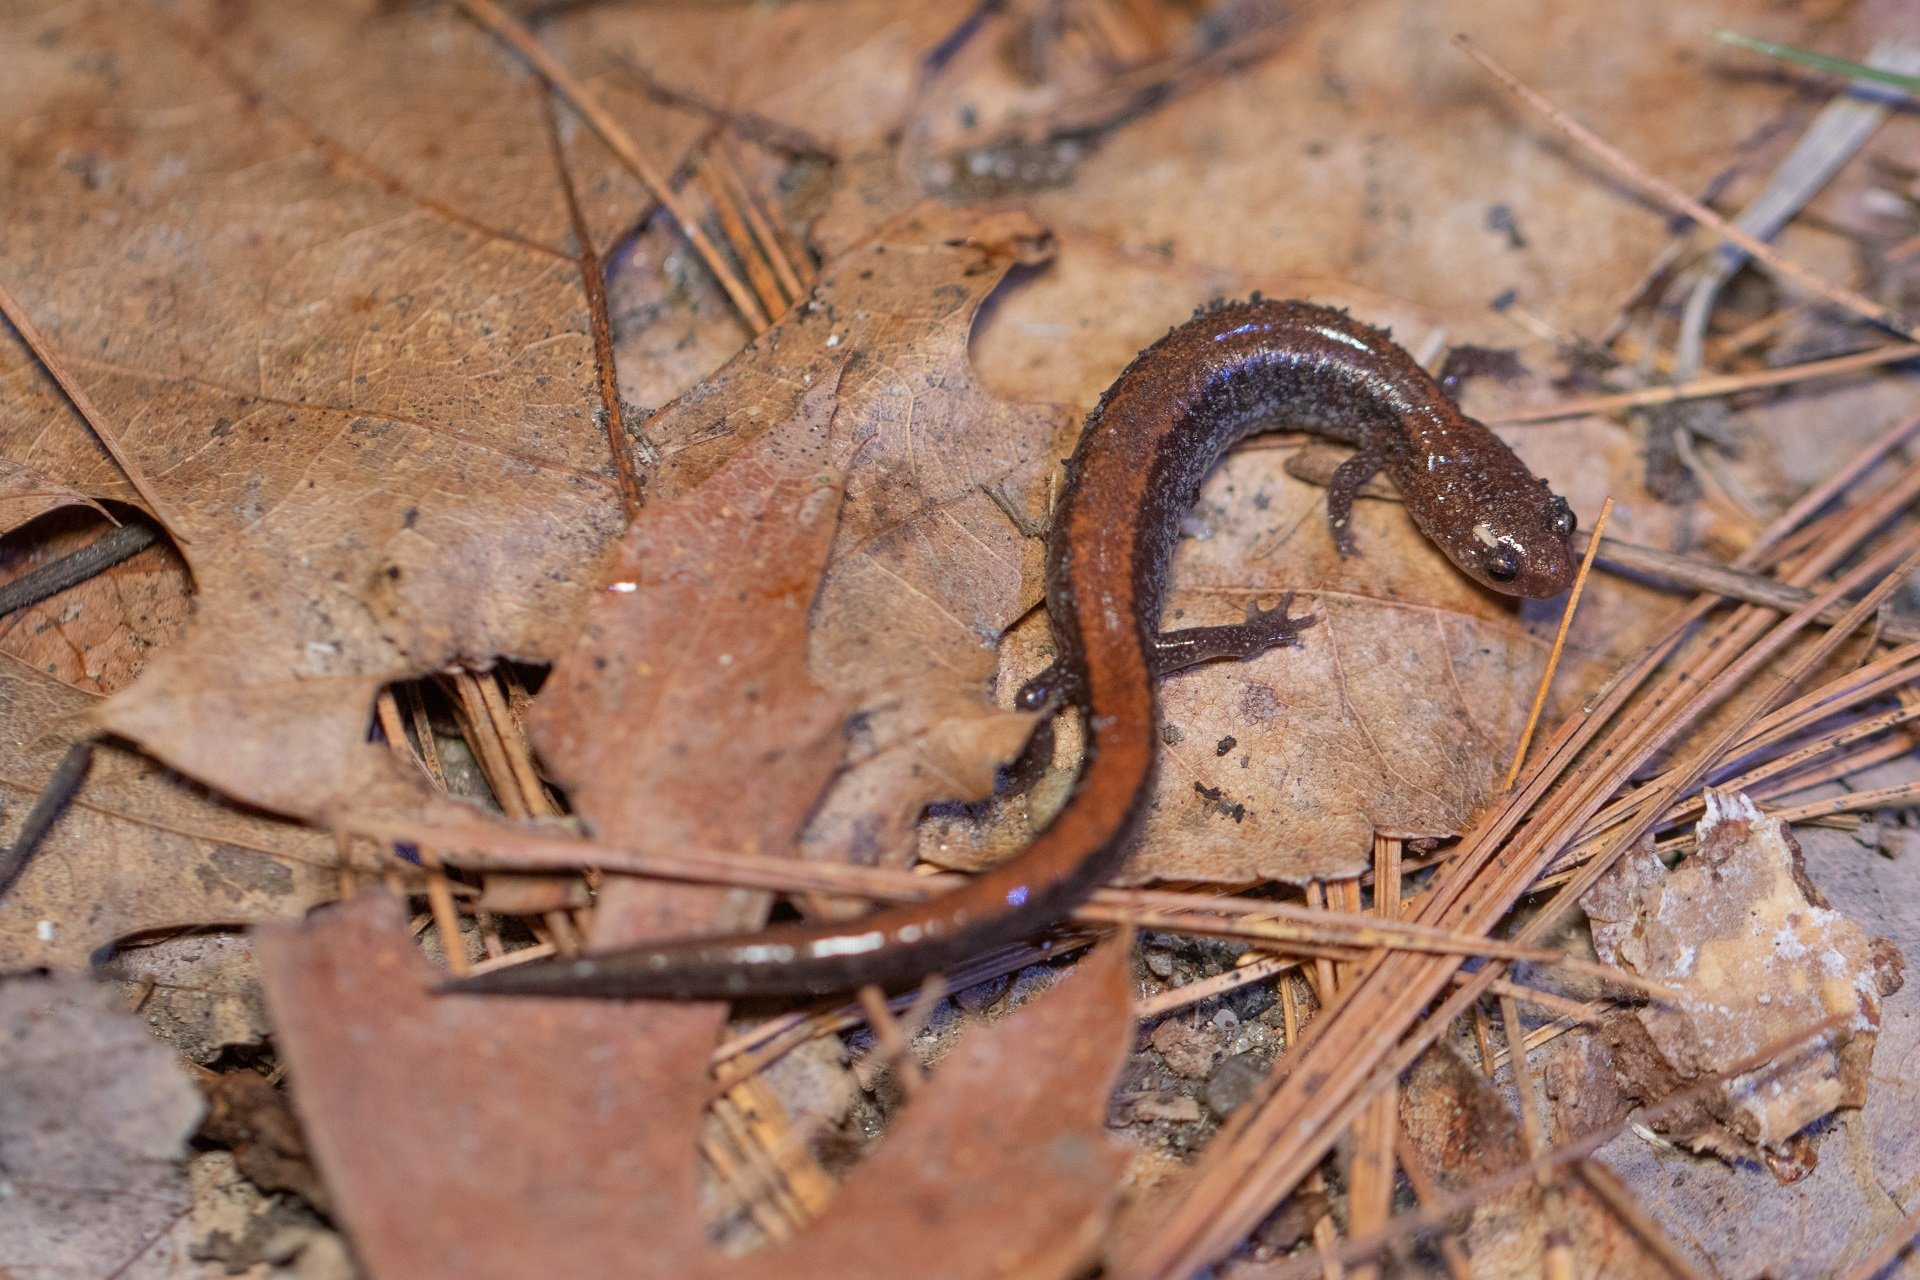 An Eastern Red-Backed Salamander curves across brown oak leaves and long evergreen needles on the ground.